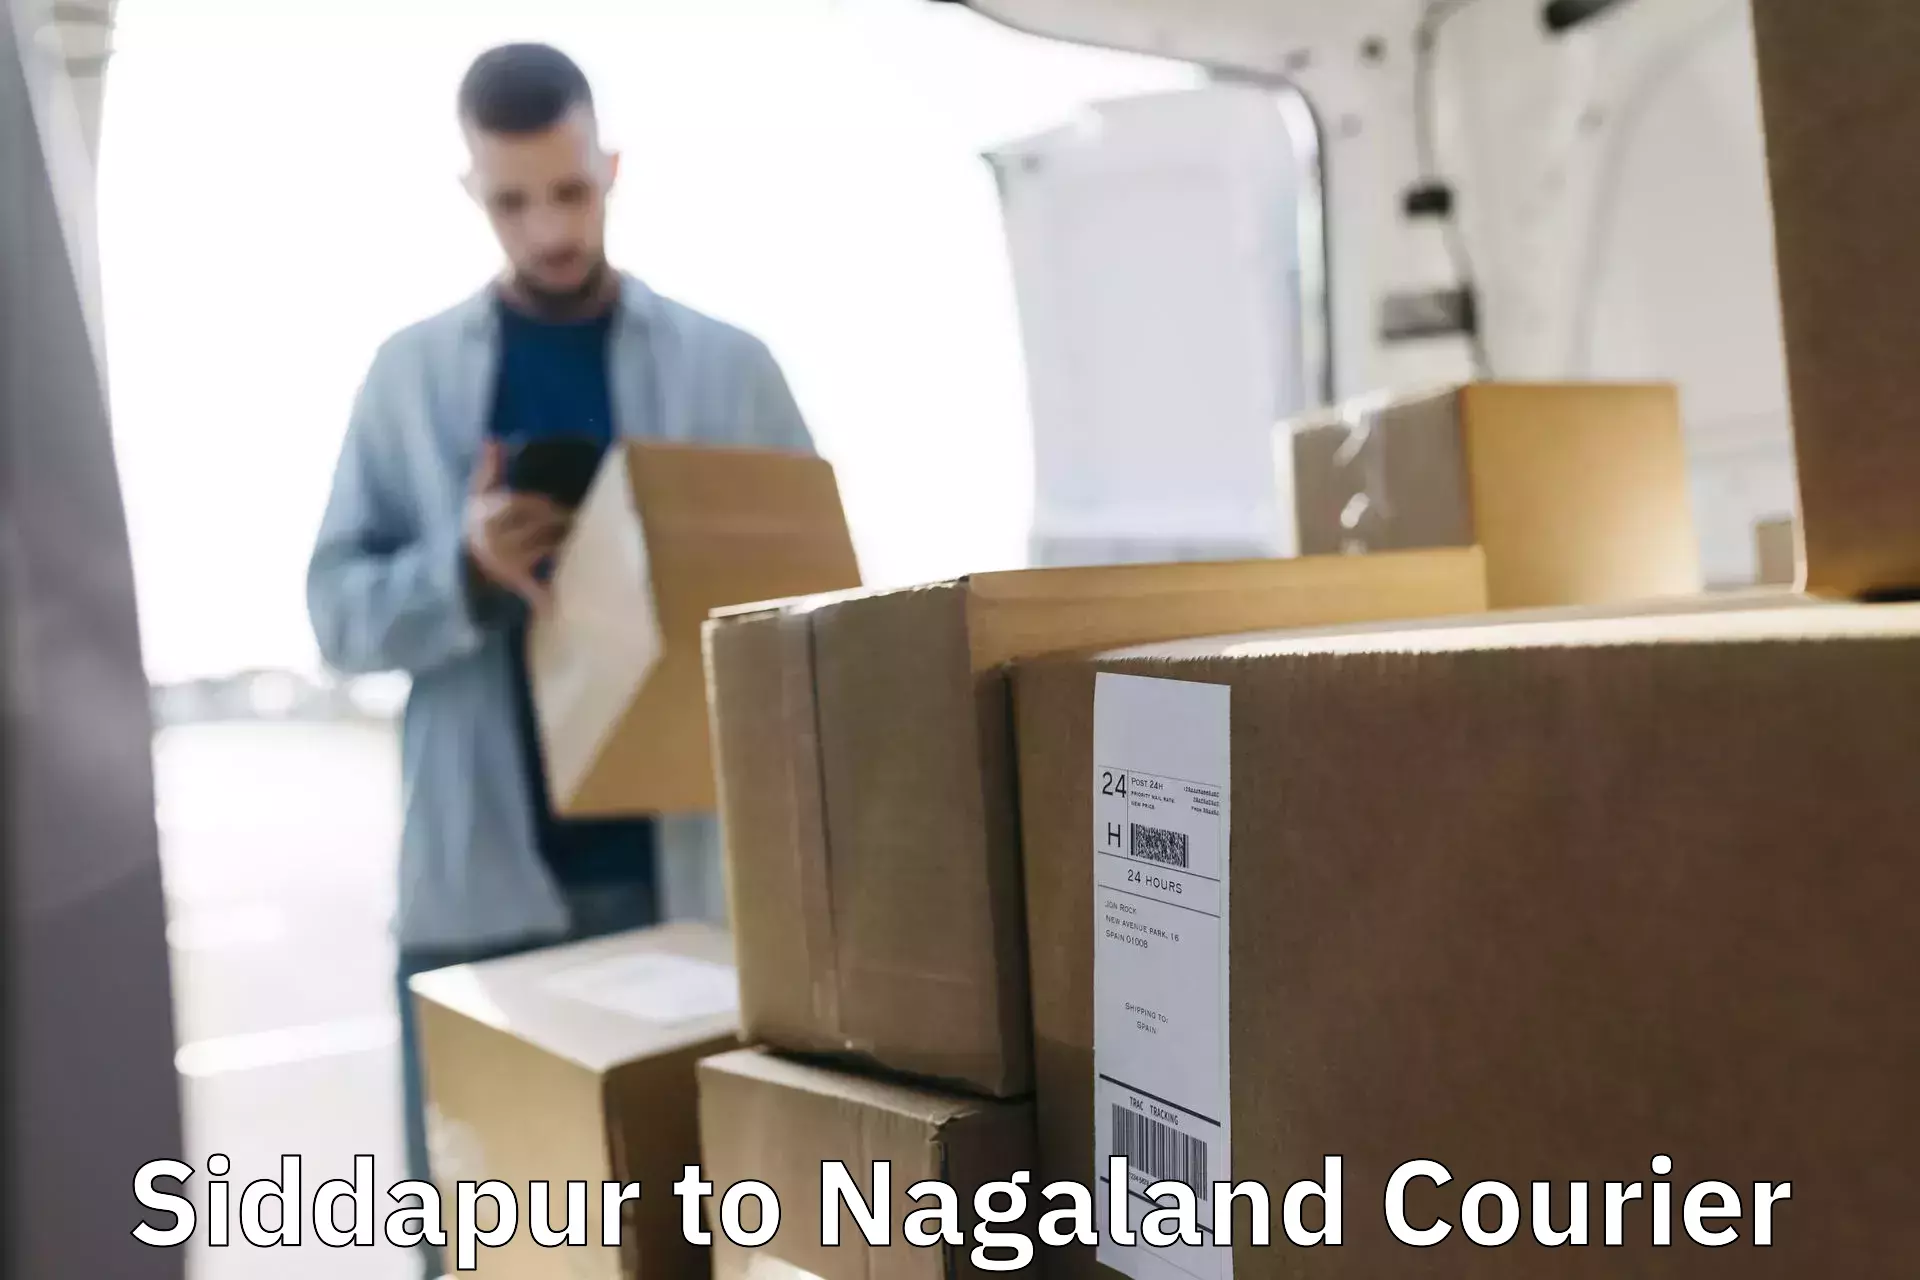 Parcel handling and care Siddapur to Nagaland